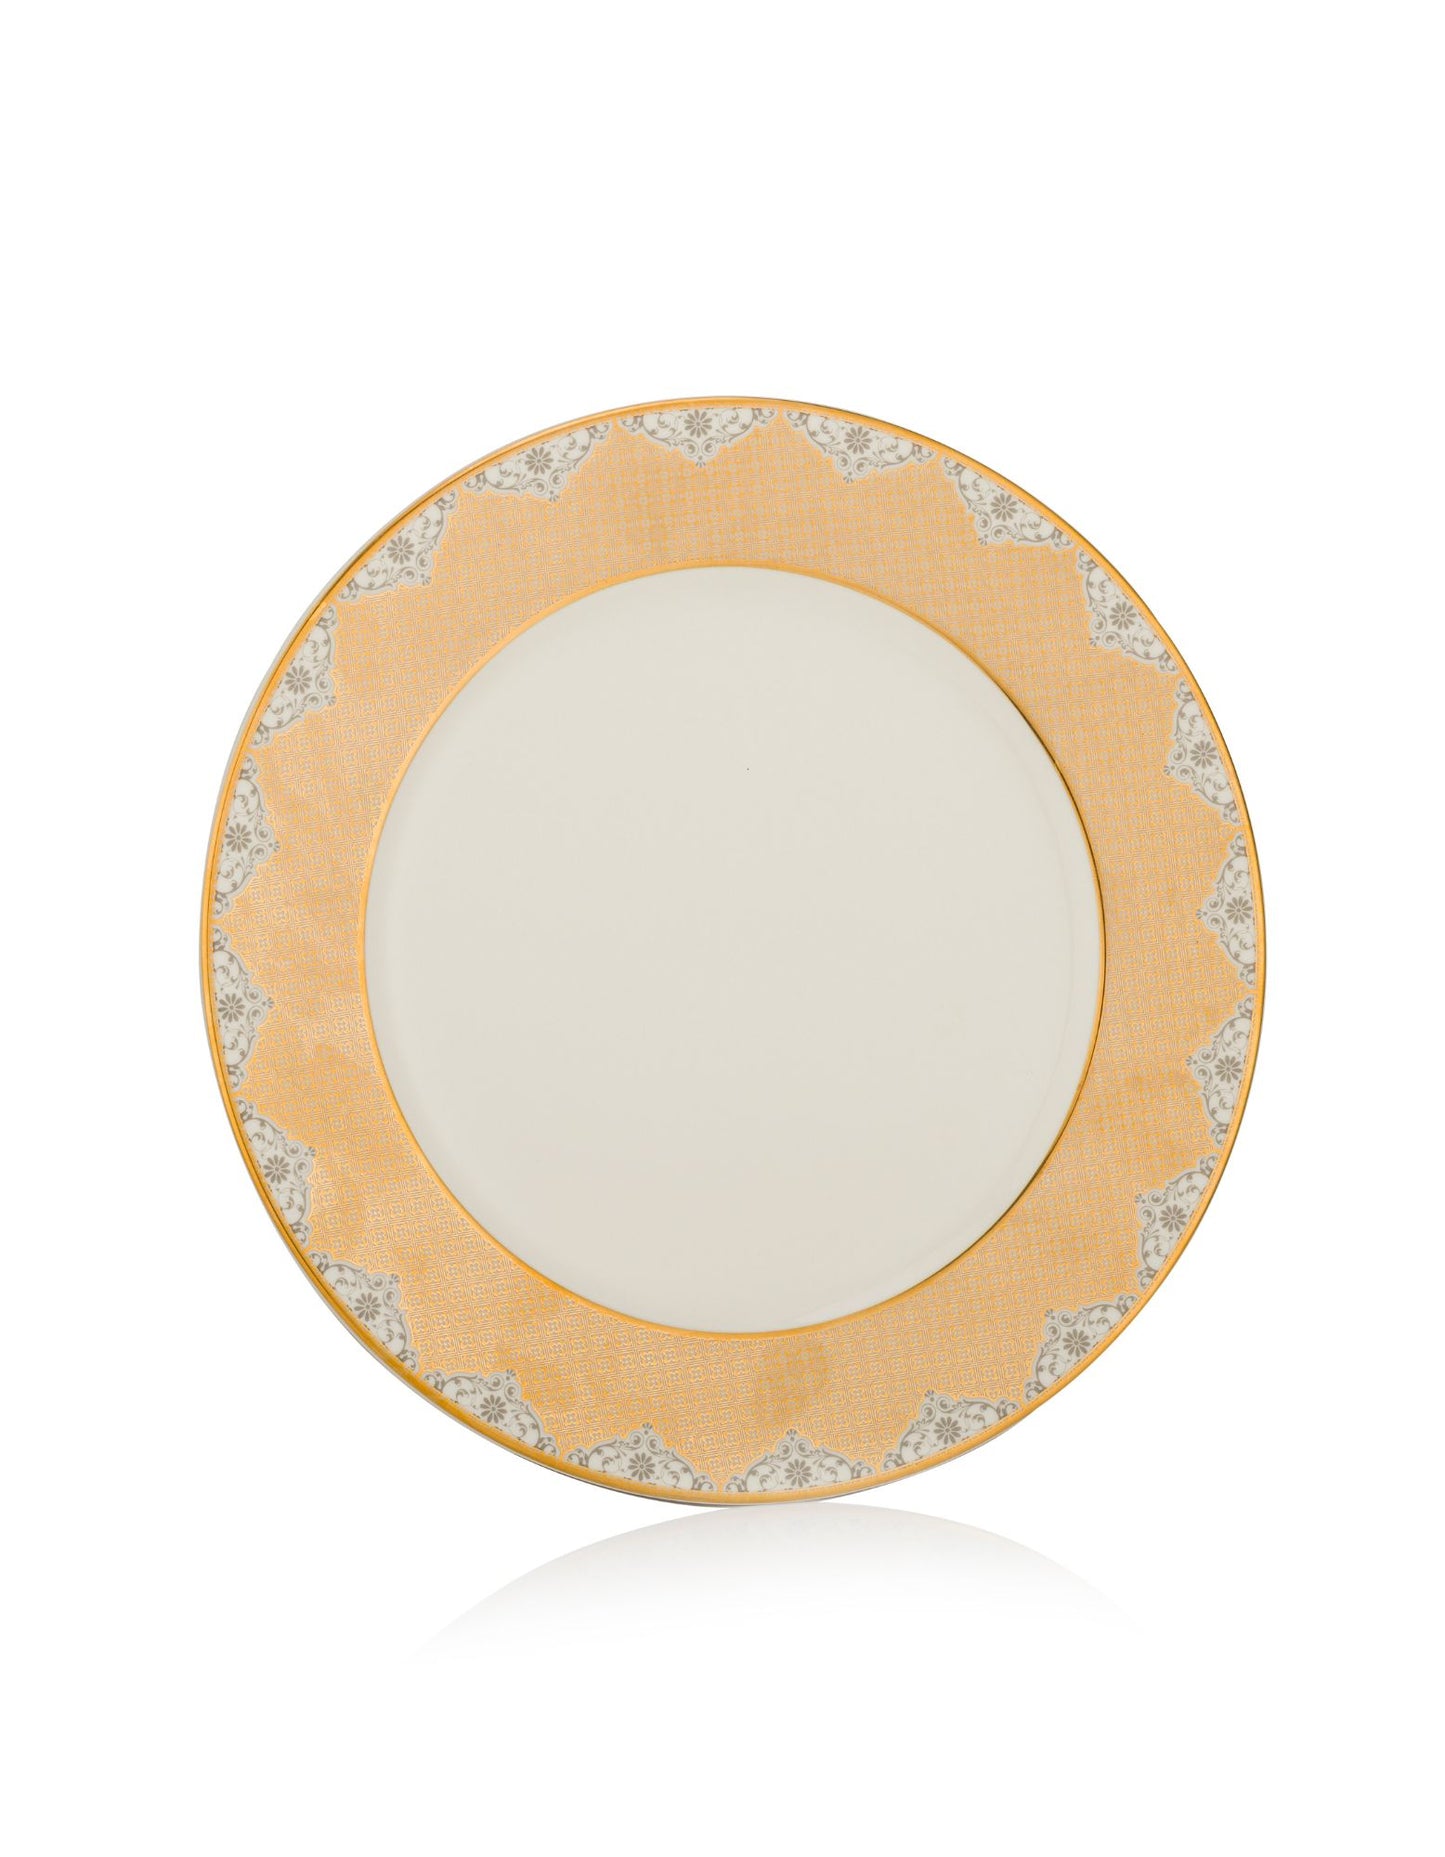 Mirror Collection - Dinner Plate (2pc)